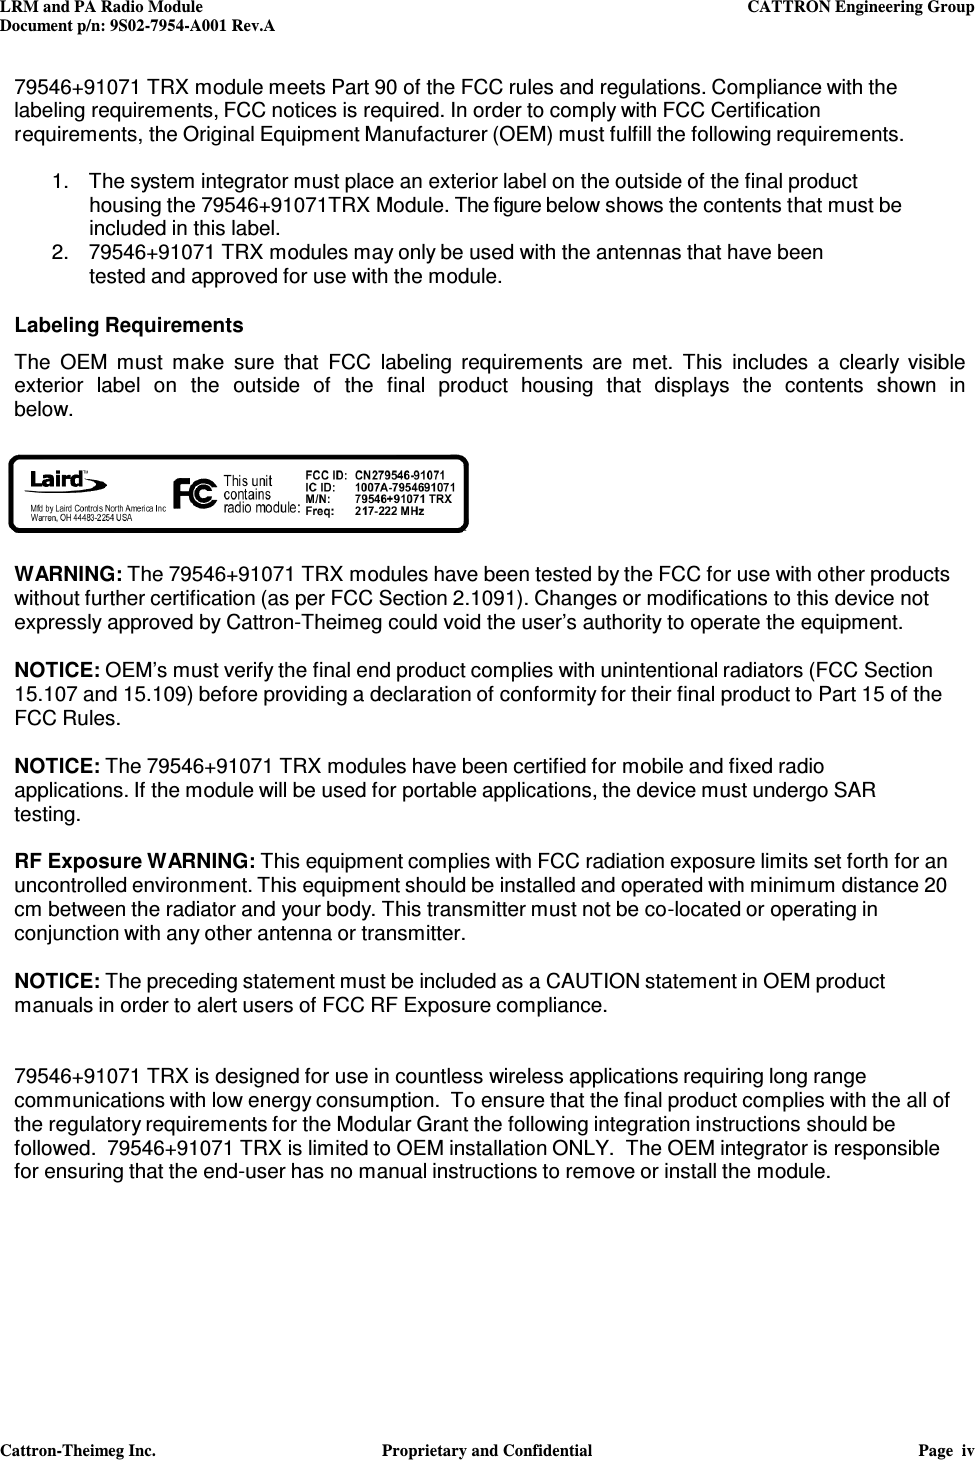 LRM and PA Radio Module    CATTRON Engineering Group Document p/n: 9S02-7954-A001 Rev.A   Cattron-Theimeg Inc.  Proprietary and Confidential  Page  iv  79546+91071 TRX module meets Part 90 of the FCC rules and regulations. Compliance with the labeling requirements, FCC notices is required. In order to comply with FCC Certification requirements, the Original Equipment Manufacturer (OEM) must fulfill the following requirements.  1.   The system integrator must place an exterior label on the outside of the final product housing the 79546+91071TRX Module. The figure below shows the contents that must be included in this label. 2.   79546+91071 TRX modules may only be used with the antennas that have been tested and approved for use with the module.   Labeling Requirements  The  OEM  must  make  sure  that  FCC  labeling  requirements  are  met.  This  includes  a  clearly  visible exterior  label  on  the  outside  of  the  final  product  housing  that  displays  the  contents  shown  in below.     WARNING: The 79546+91071 TRX modules have been tested by the FCC for use with other products without further certification (as per FCC Section 2.1091). Changes or modifications to this device not expressly approved by Cattron-Theimeg could void the user’s authority to operate the equipment.  NOTICE: OEM’s must verify the final end product complies with unintentional radiators (FCC Section 15.107 and 15.109) before providing a declaration of conformity for their final product to Part 15 of the FCC Rules.  NOTICE: The 79546+91071 TRX modules have been certified for mobile and fixed radio applications. If the module will be used for portable applications, the device must undergo SAR testing.  RF Exposure WARNING: This equipment complies with FCC radiation exposure limits set forth for an uncontrolled environment. This equipment should be installed and operated with minimum distance 20 cm between the radiator and your body. This transmitter must not be co-located or operating in conjunction with any other antenna or transmitter.  NOTICE: The preceding statement must be included as a CAUTION statement in OEM product manuals in order to alert users of FCC RF Exposure compliance.   79546+91071 TRX is designed for use in countless wireless applications requiring long range communications with low energy consumption.  To ensure that the final product complies with the all of the regulatory requirements for the Modular Grant the following integration instructions should be followed.  79546+91071 TRX is limited to OEM installation ONLY.  The OEM integrator is responsible for ensuring that the end-user has no manual instructions to remove or install the module.       